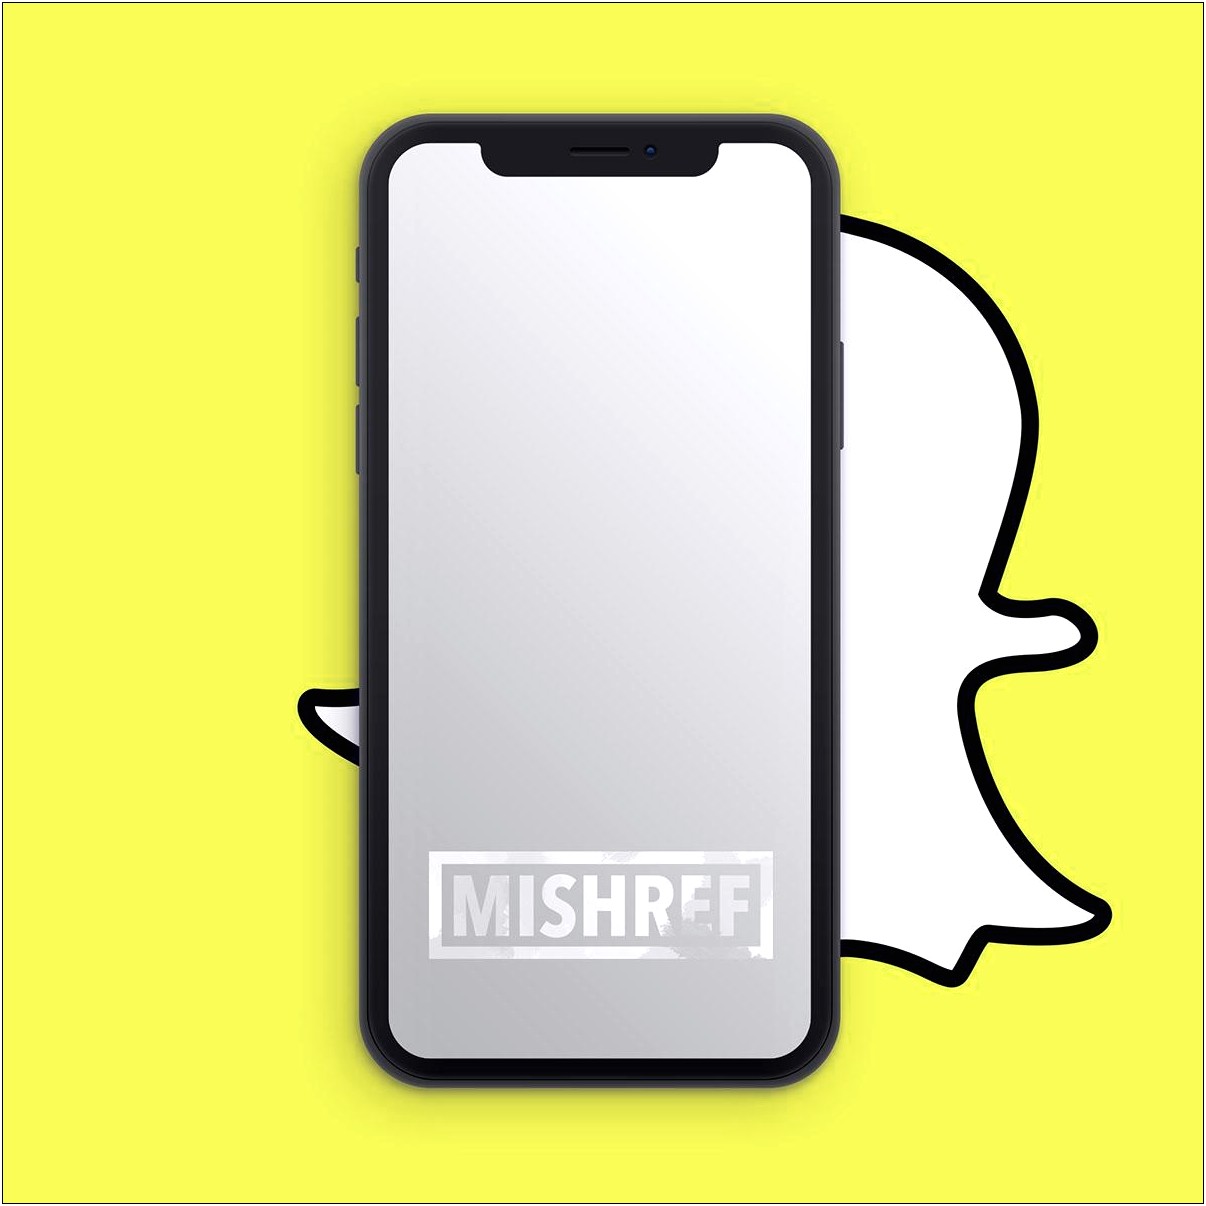 Download Snapchat Geofilter Template For Adobe Photoshop